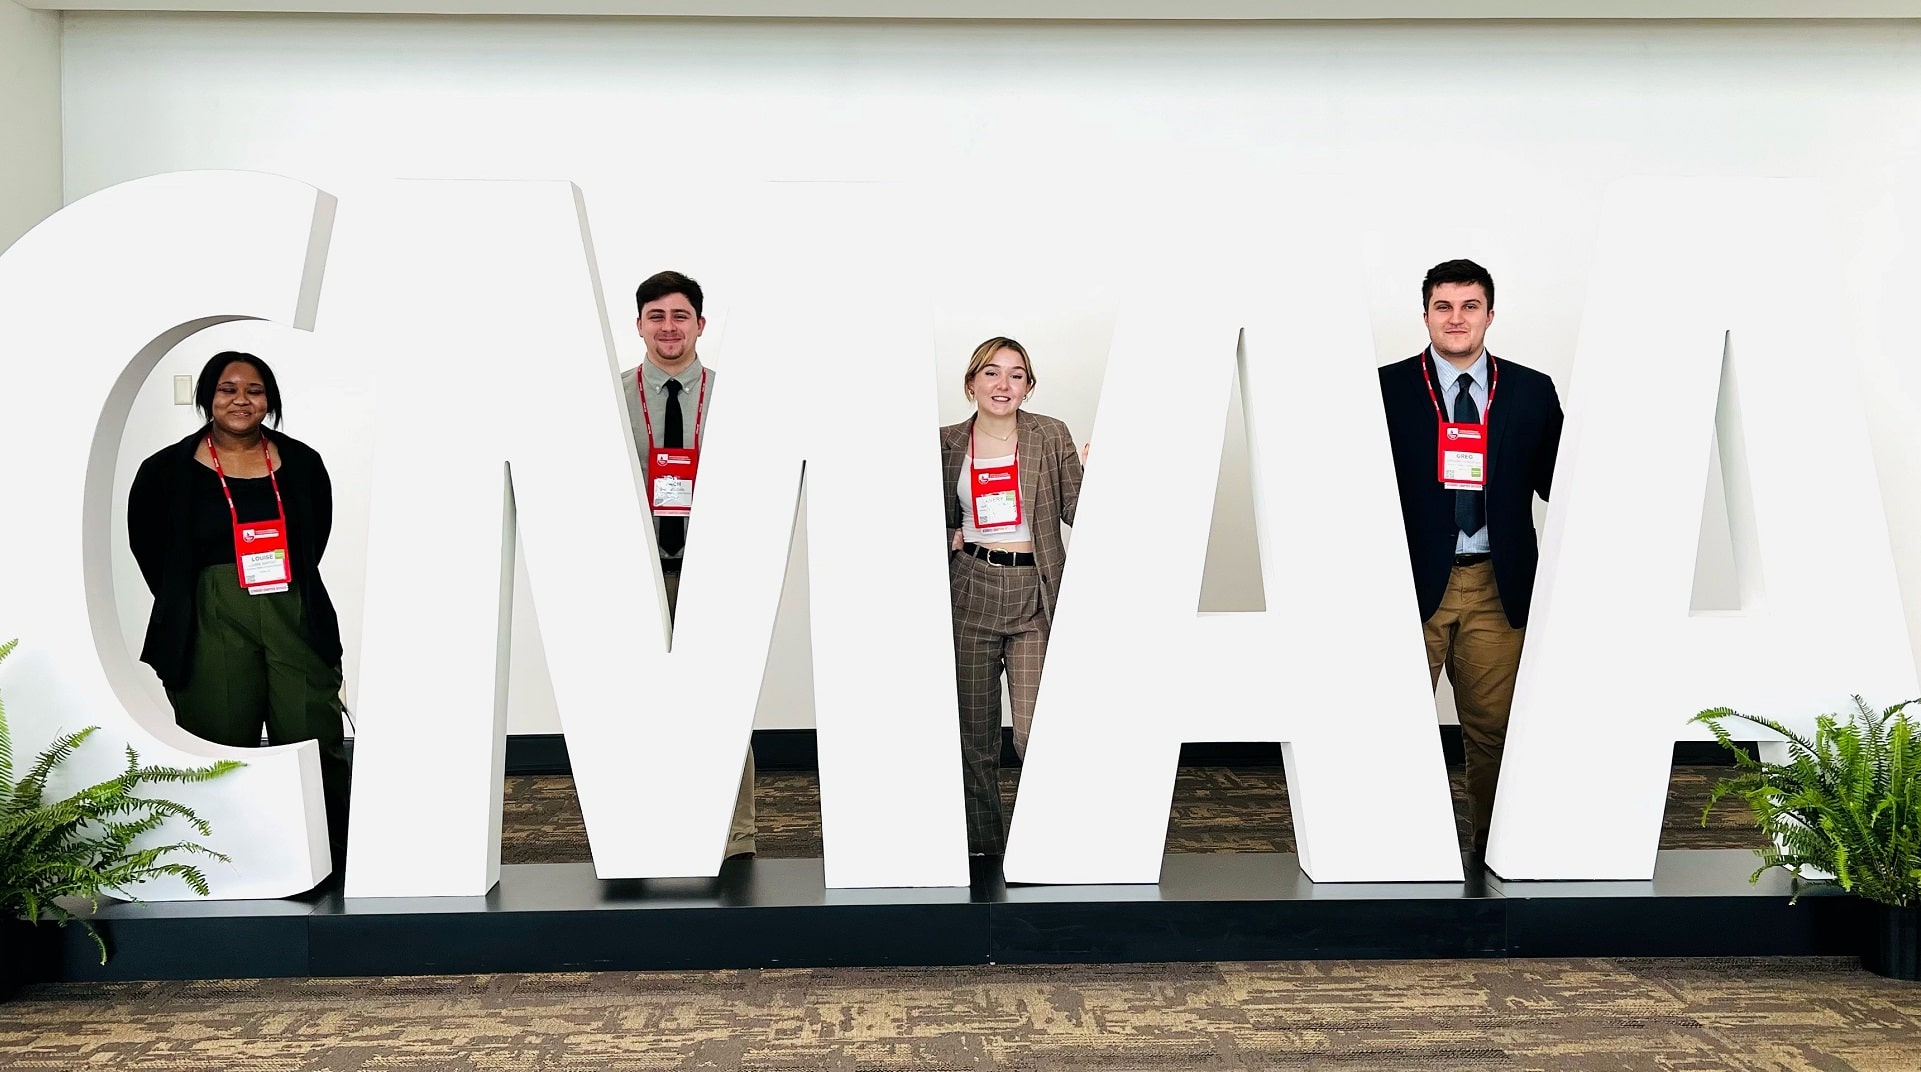 Four JWU students stand in front of sign at conference